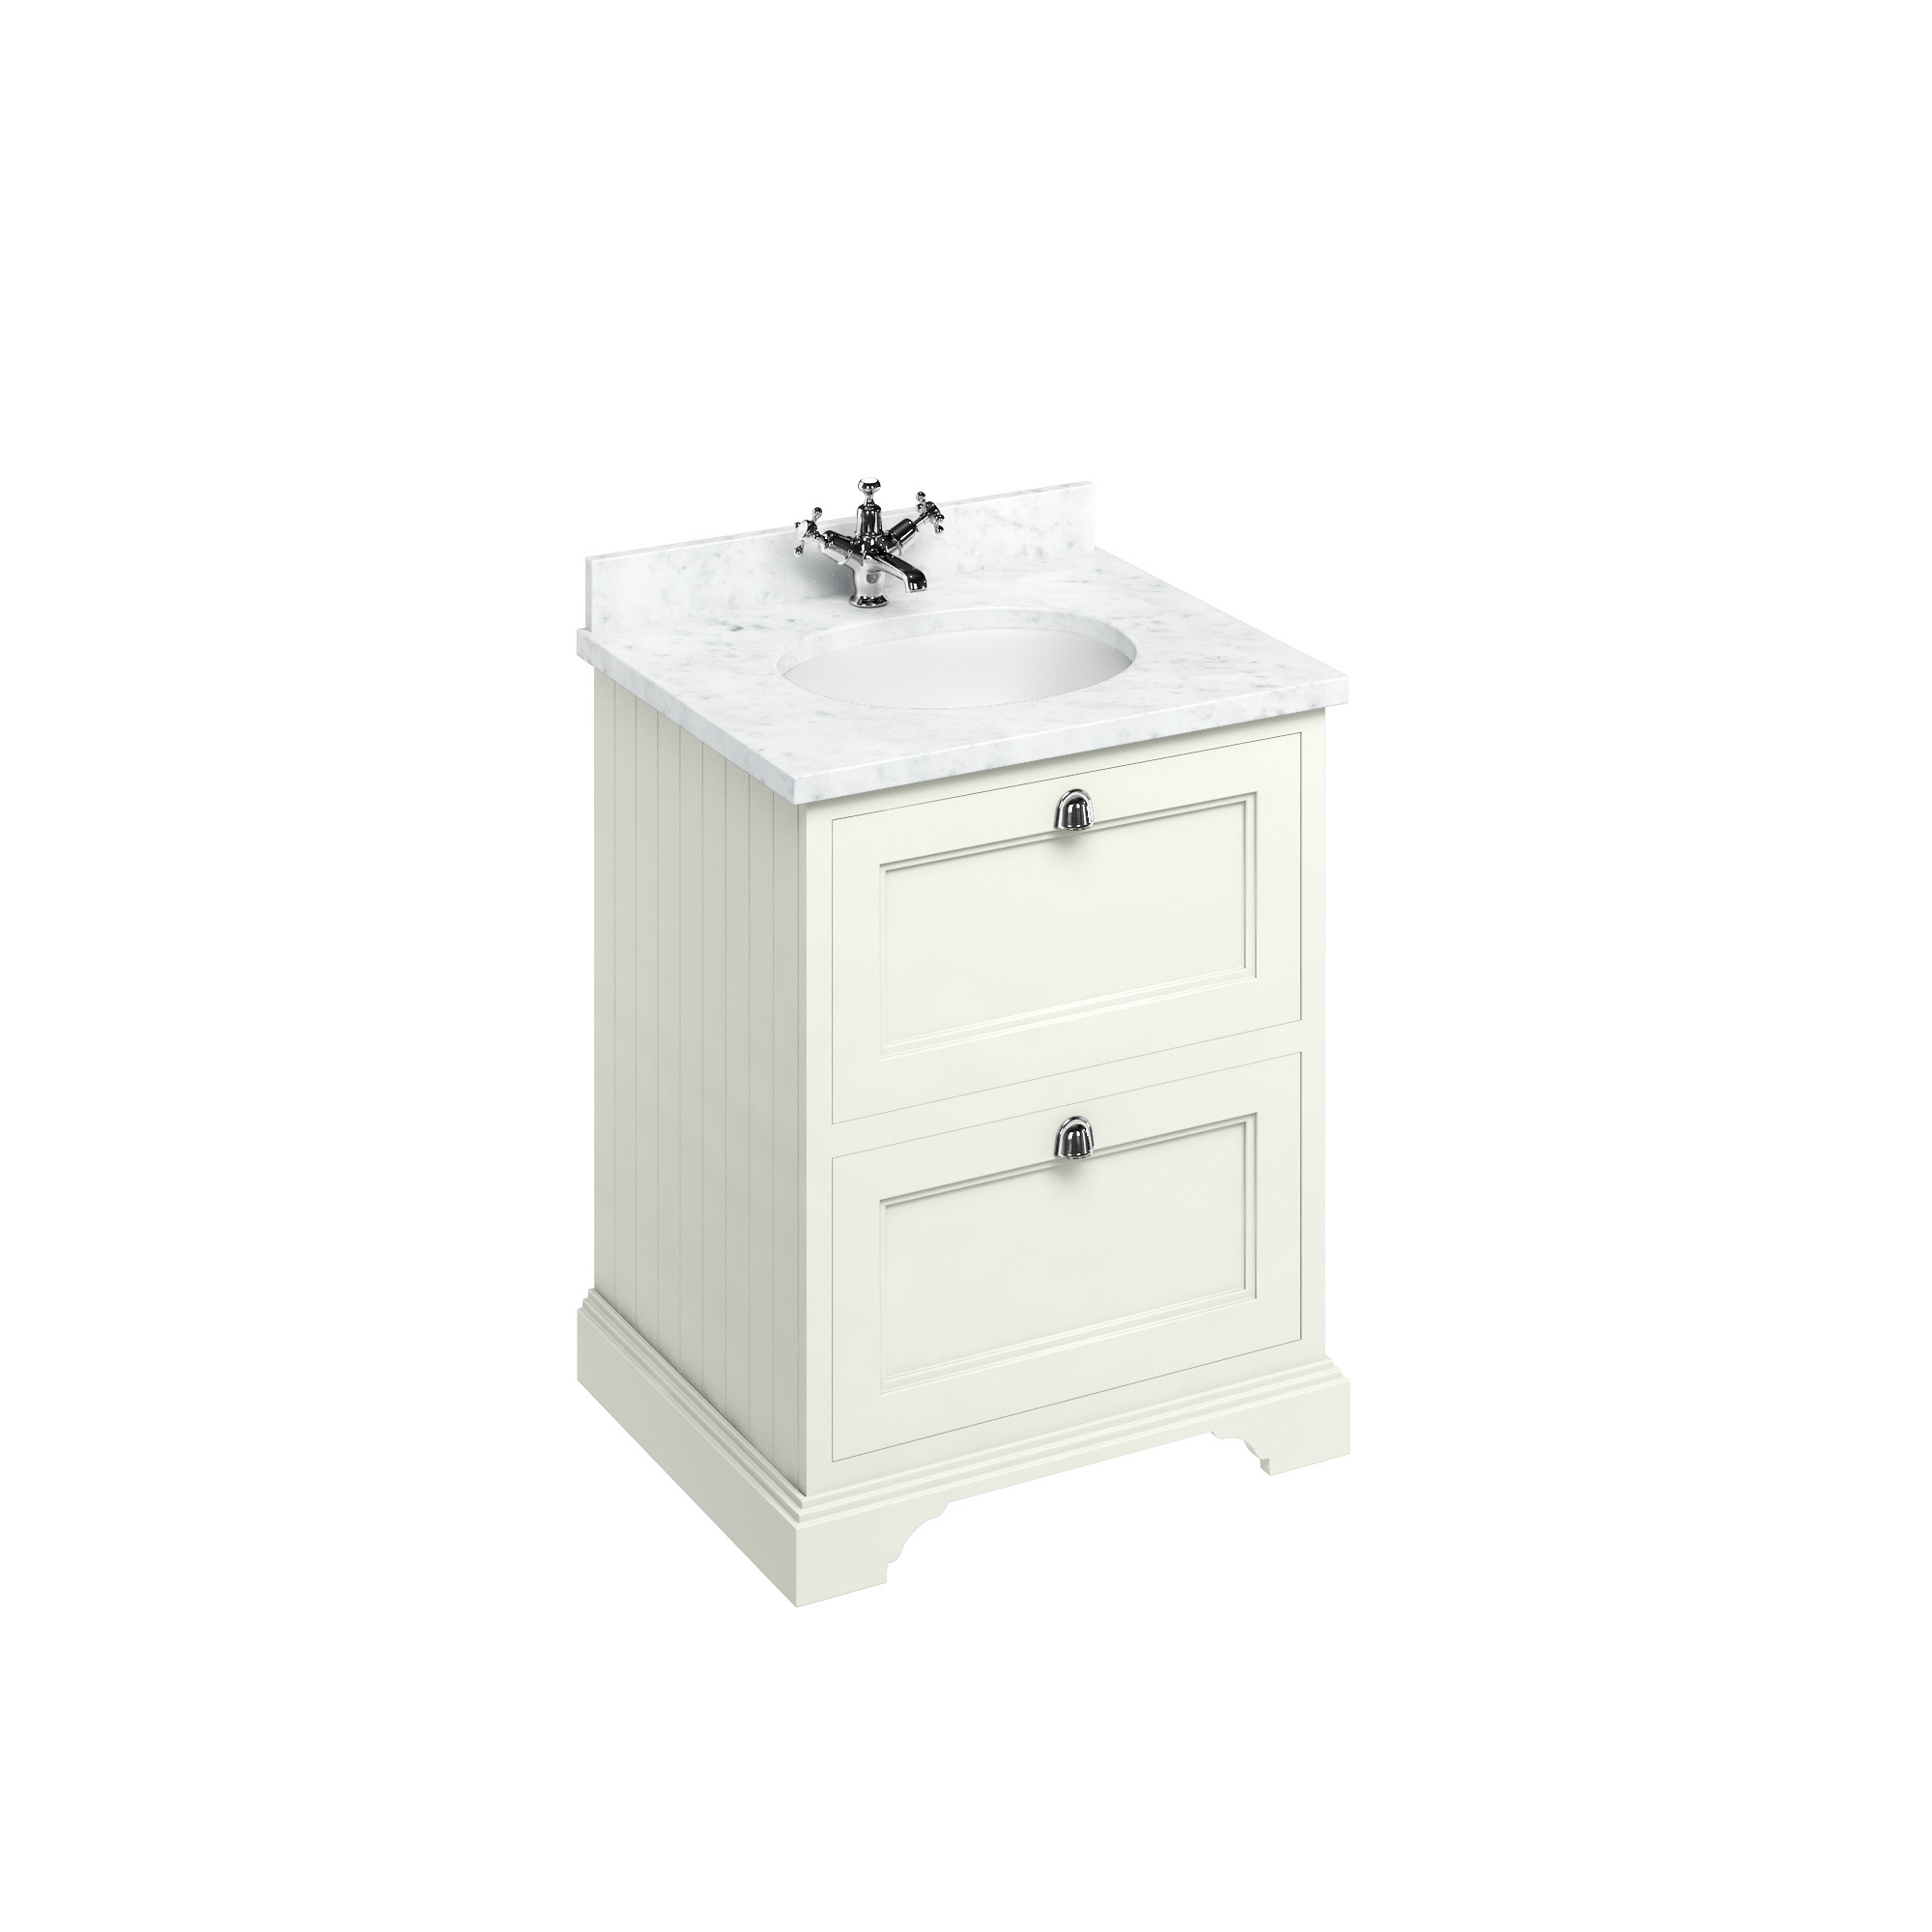 Freestanding 65 Vanity Unit with 2 drawers - Sand and Minerva Carrara white worktop with integrated white basin